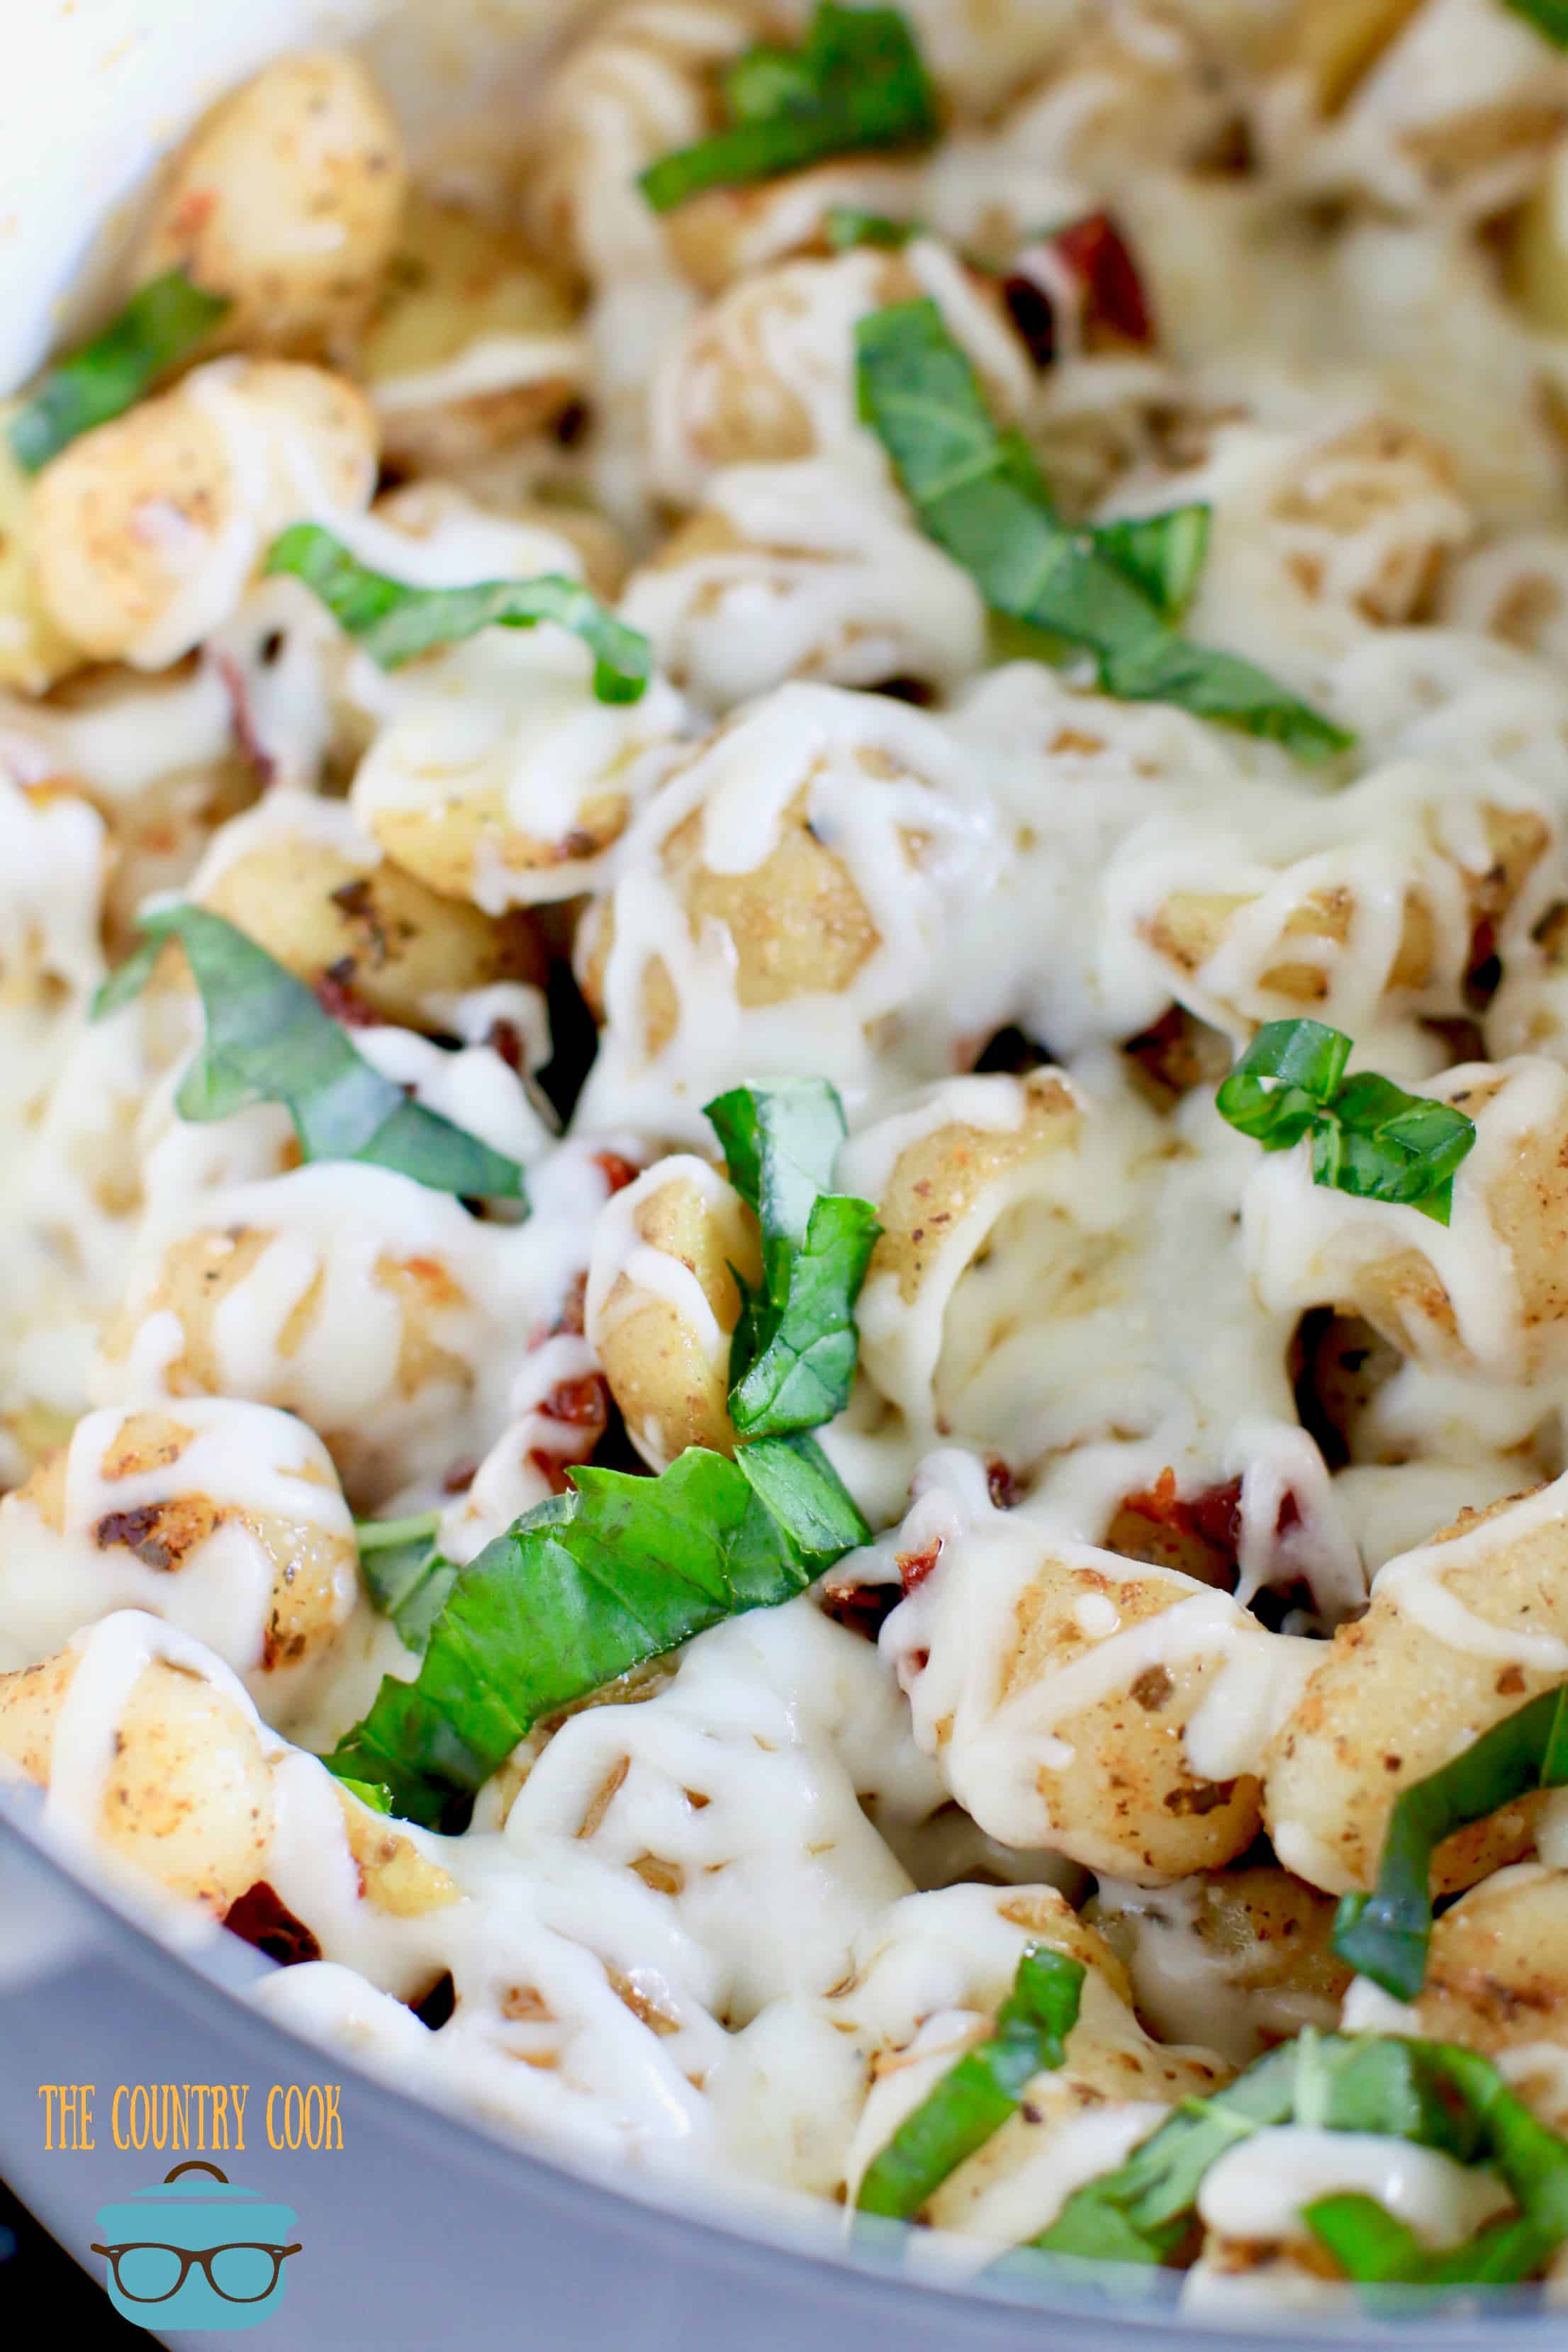 Easy Cheesy Italian Potatoes and Gnocchi shown fully cooked and topped with fresh shredded basil.